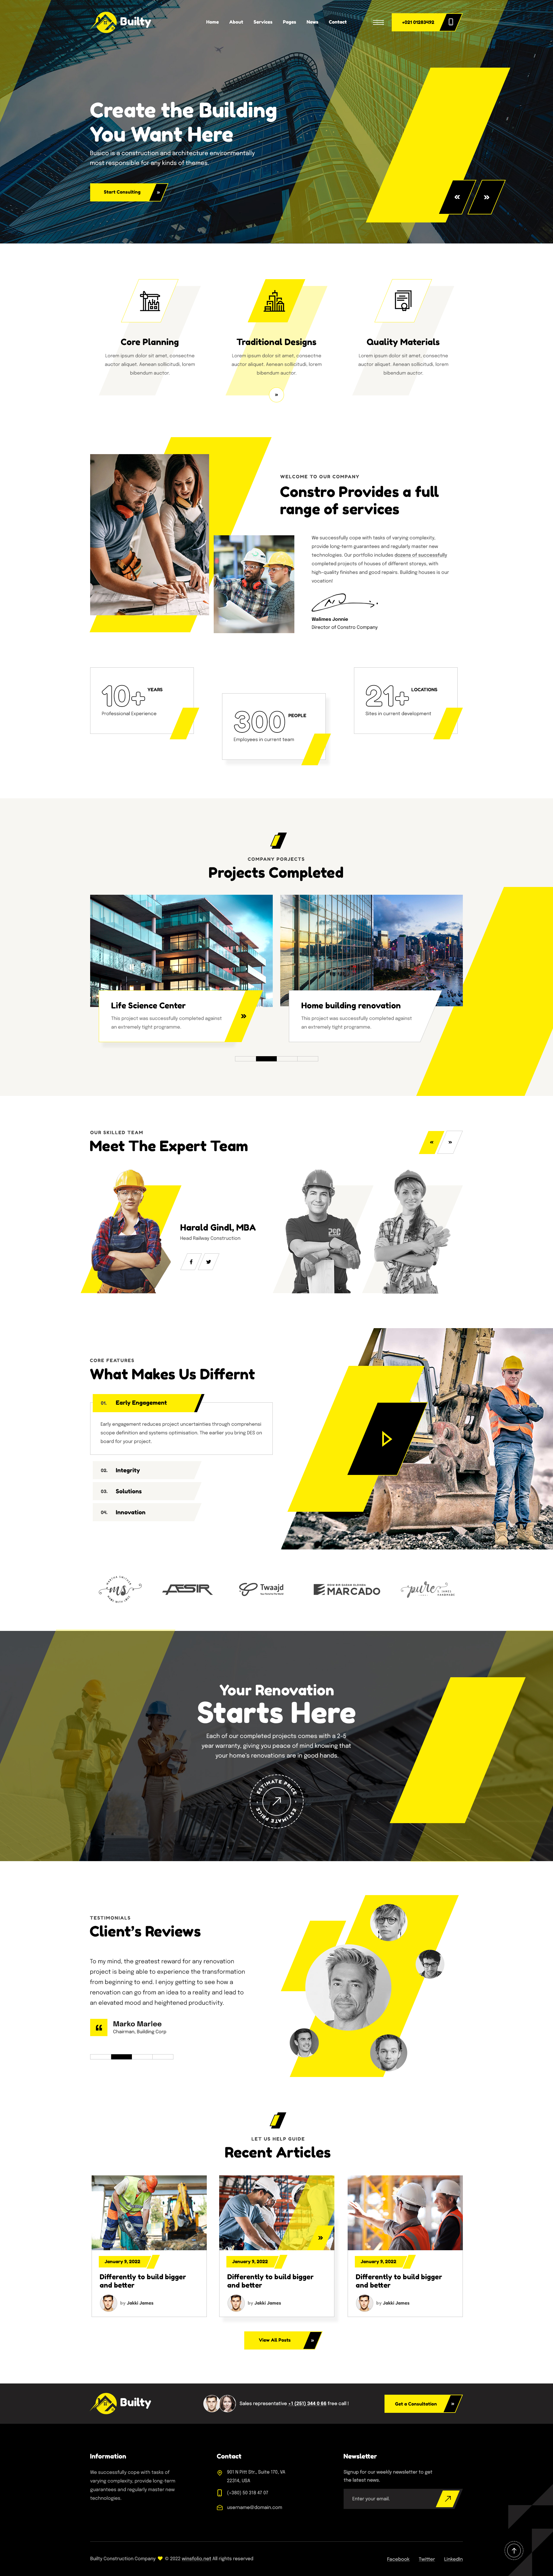 Mẫu thiết kế website Giới thiệu công ty - Xây dựng công nghiệp 02 preview_themeforest_net/item/builty-industrial-and-building-construction-html-template/full_screen_preview/38858235?_ga=2.135116465.1456227396.1703398577-879162572.1702808091